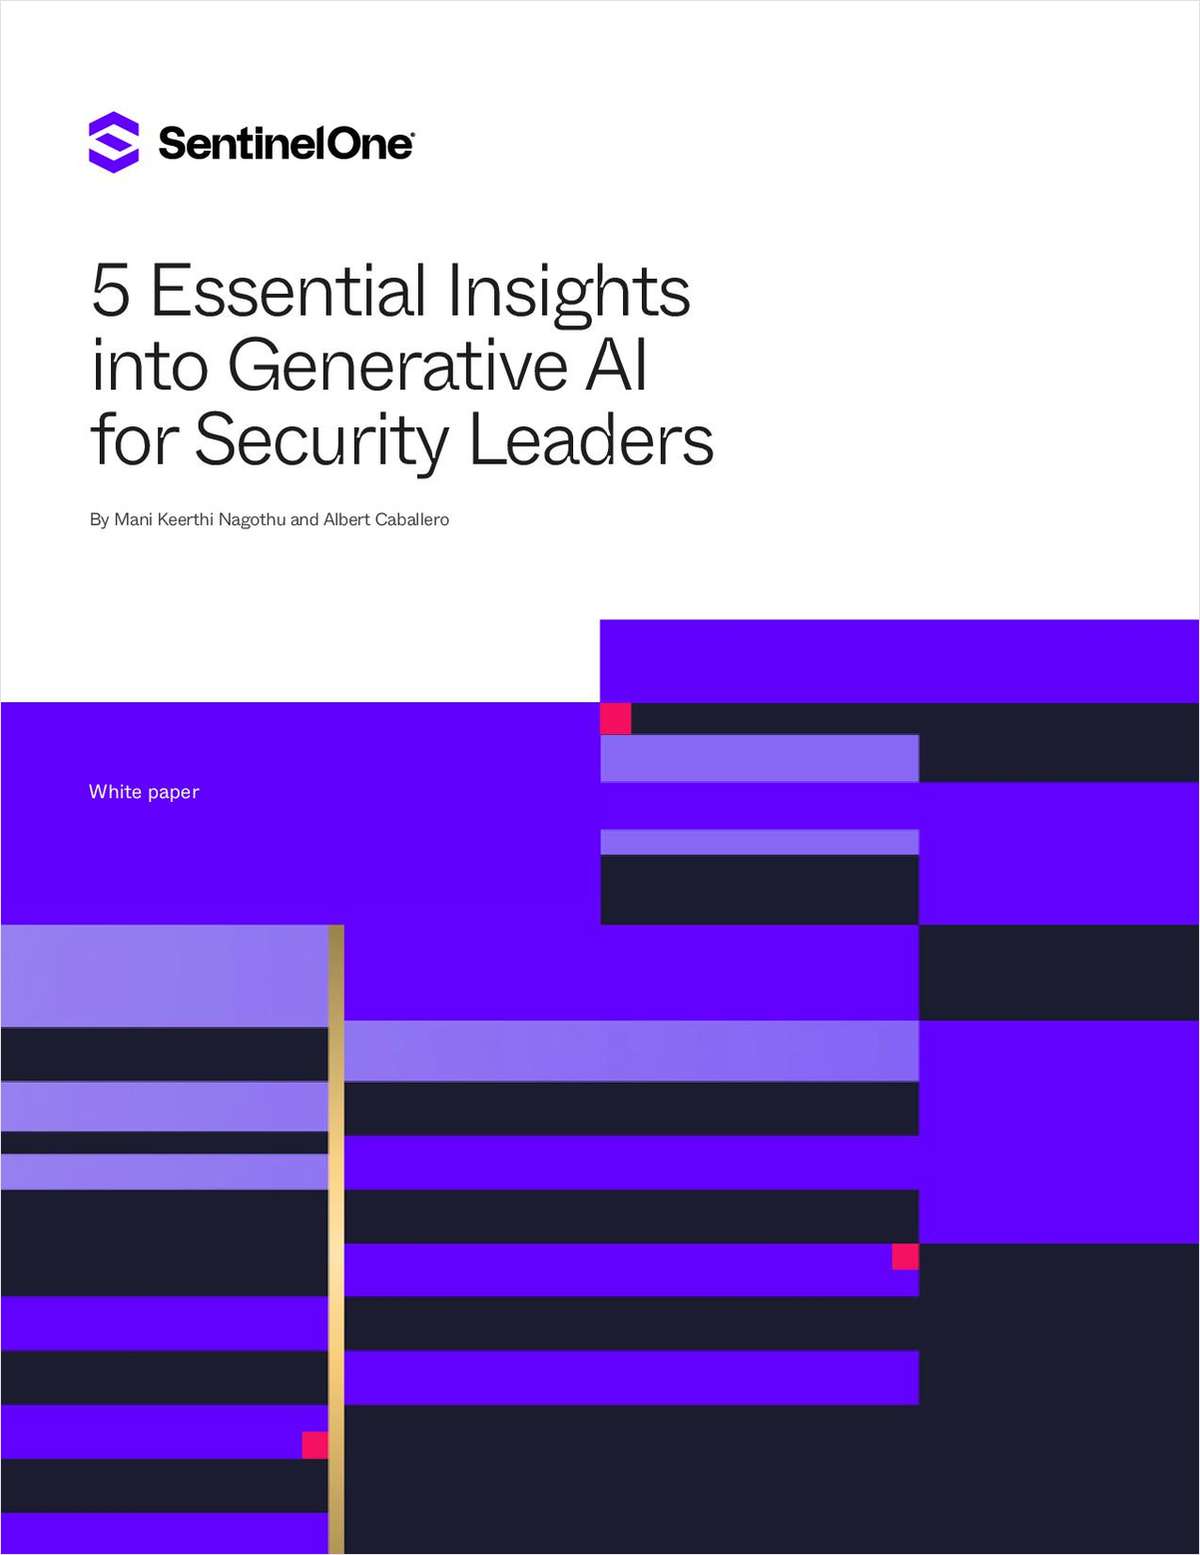 Five Essential Insights into Generative AI for Security Leaders